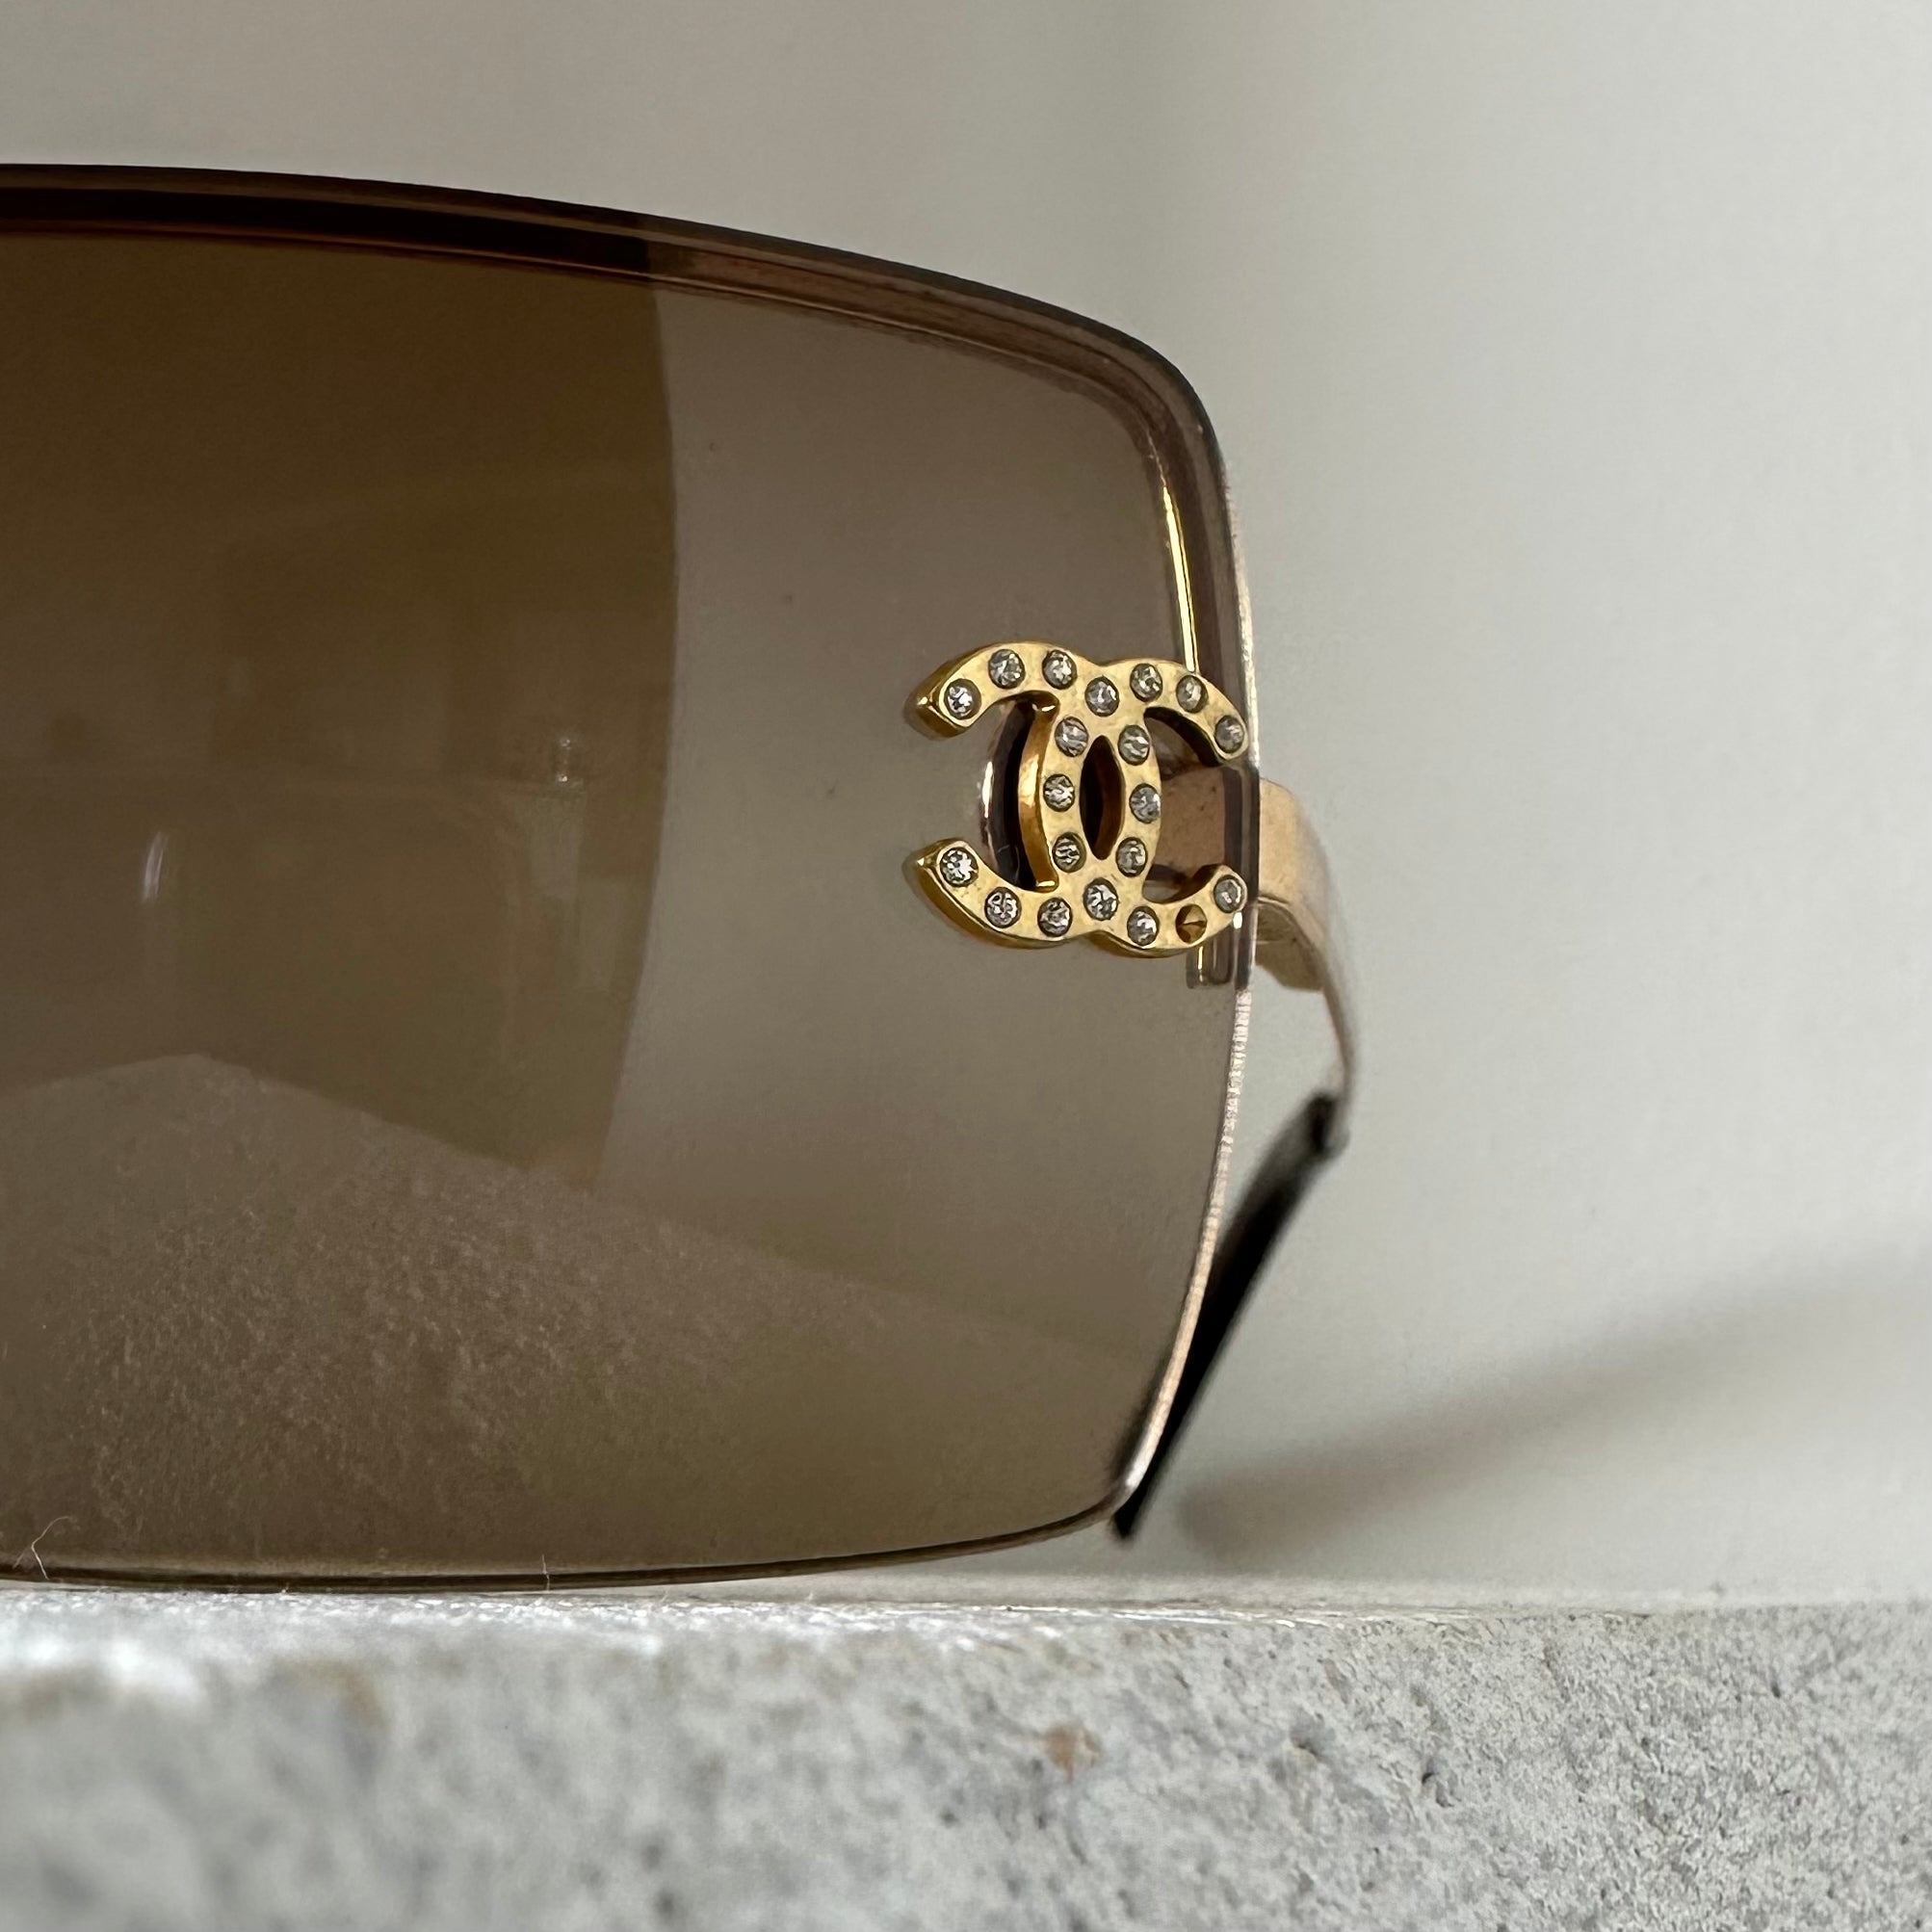 Sunglasses Chanel Gold in Metal - 24595532